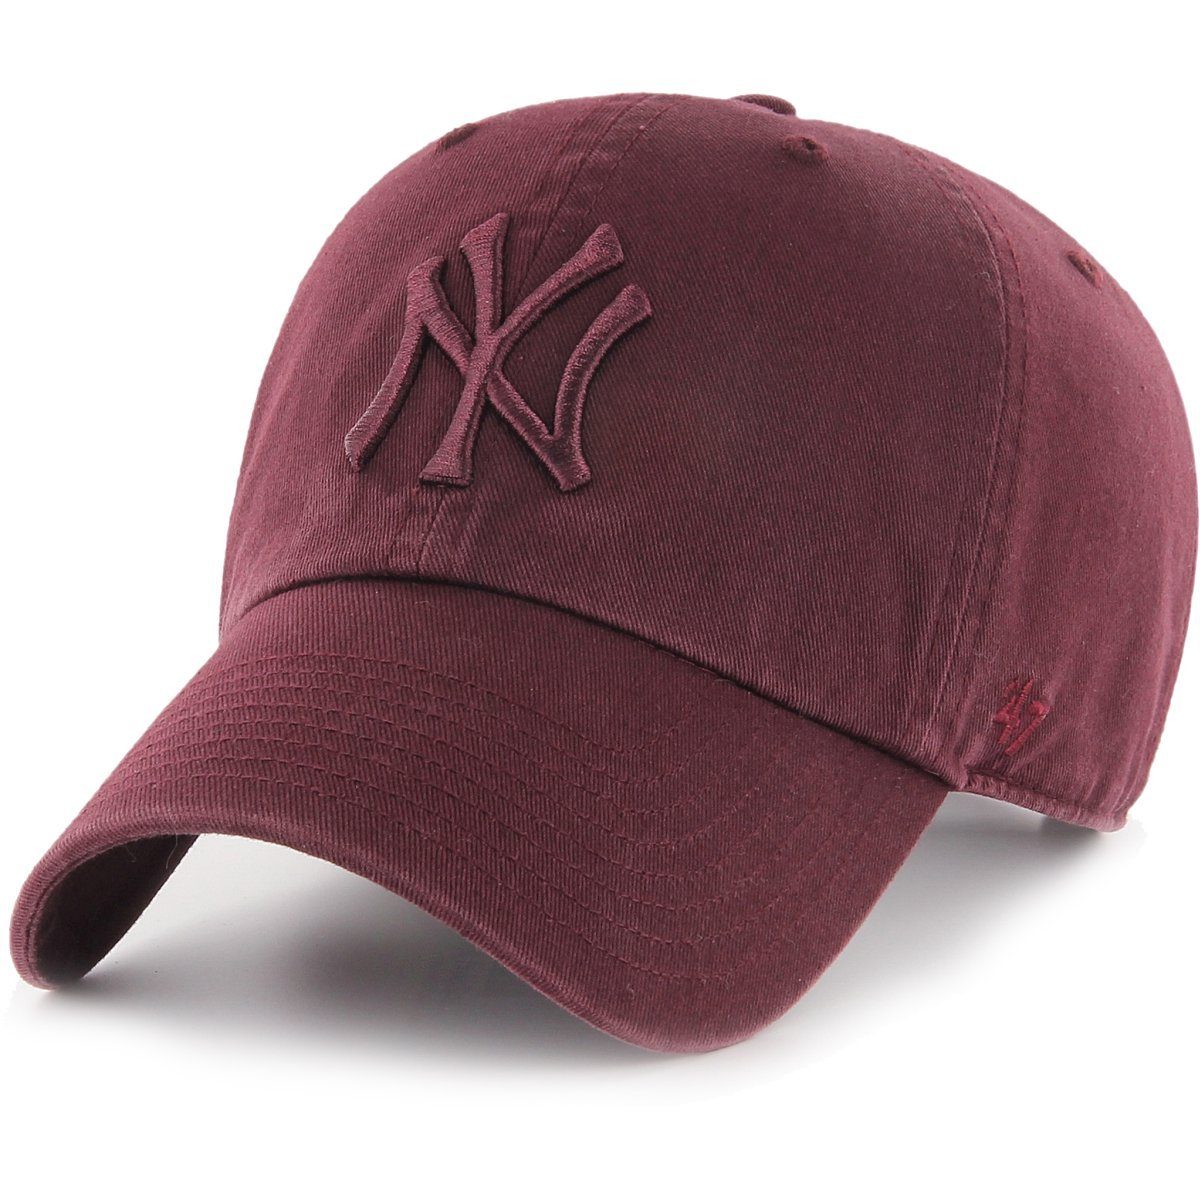 x27;47 Brand Relaxed NY Baseball Fit CLEAN UP Yankees Cap dunkel